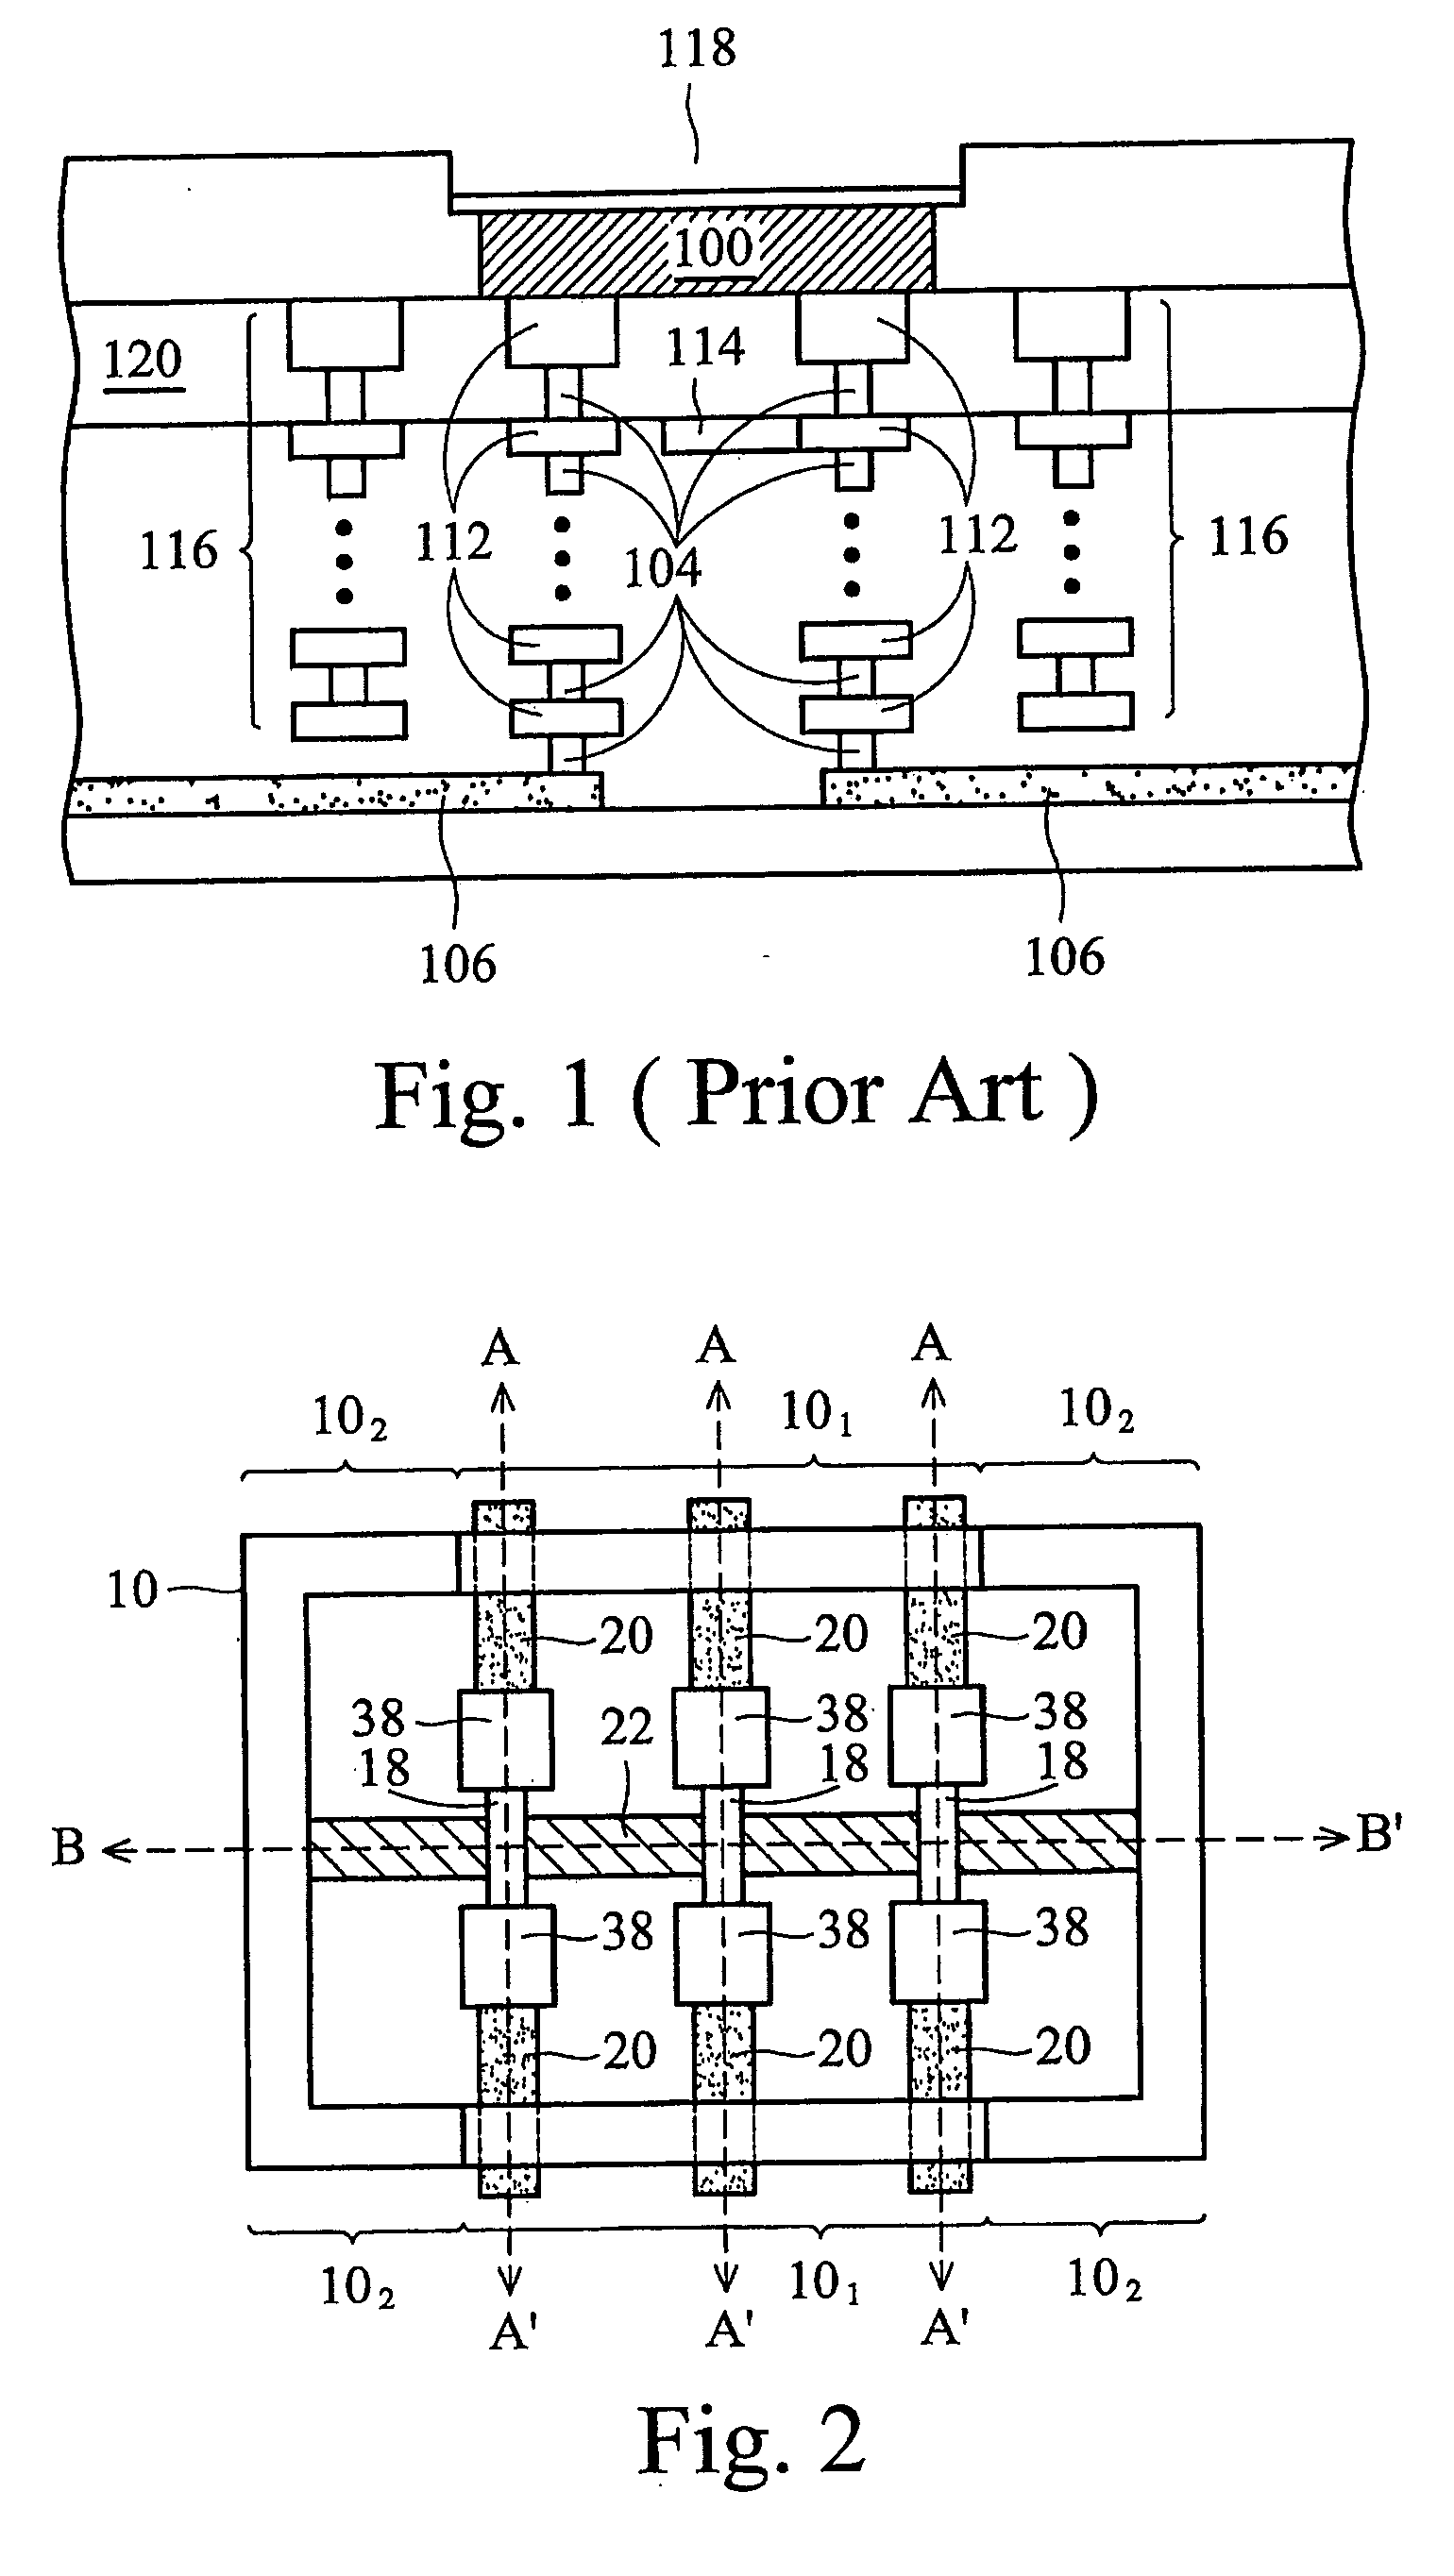 Laser fuse with efficient heat dissipation